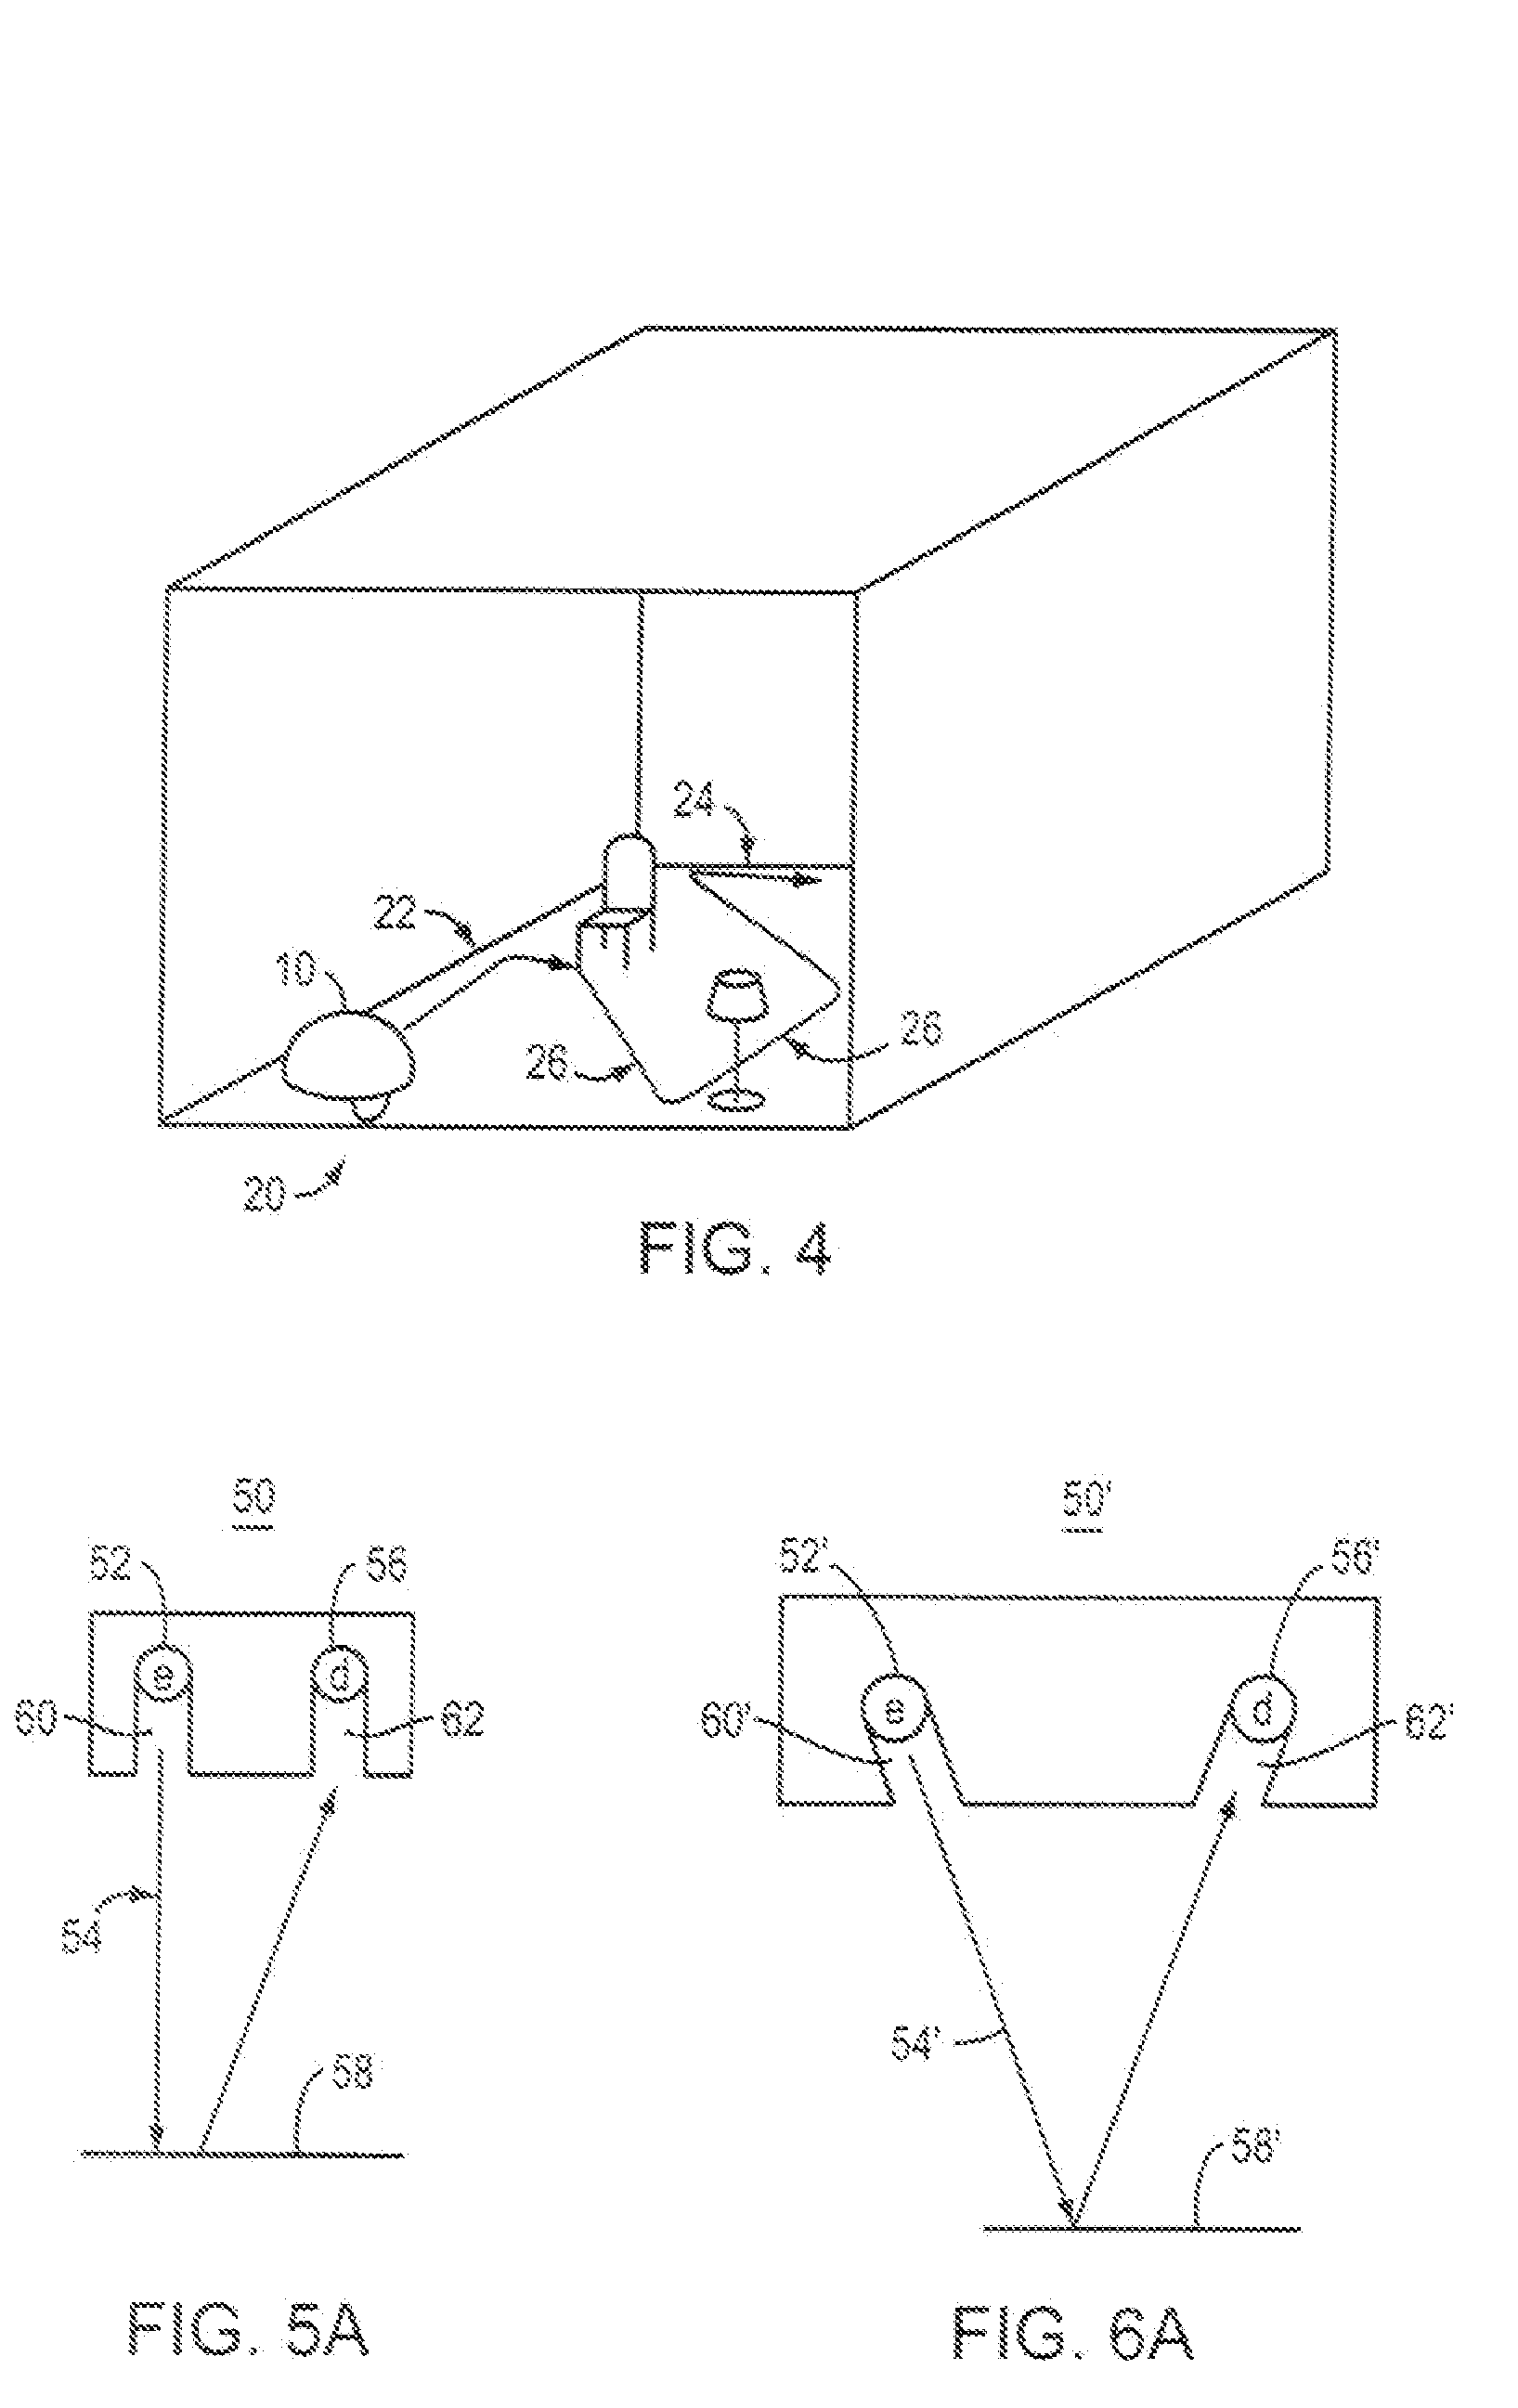 Obstacle Following Sensor Scheme for a mobile robot